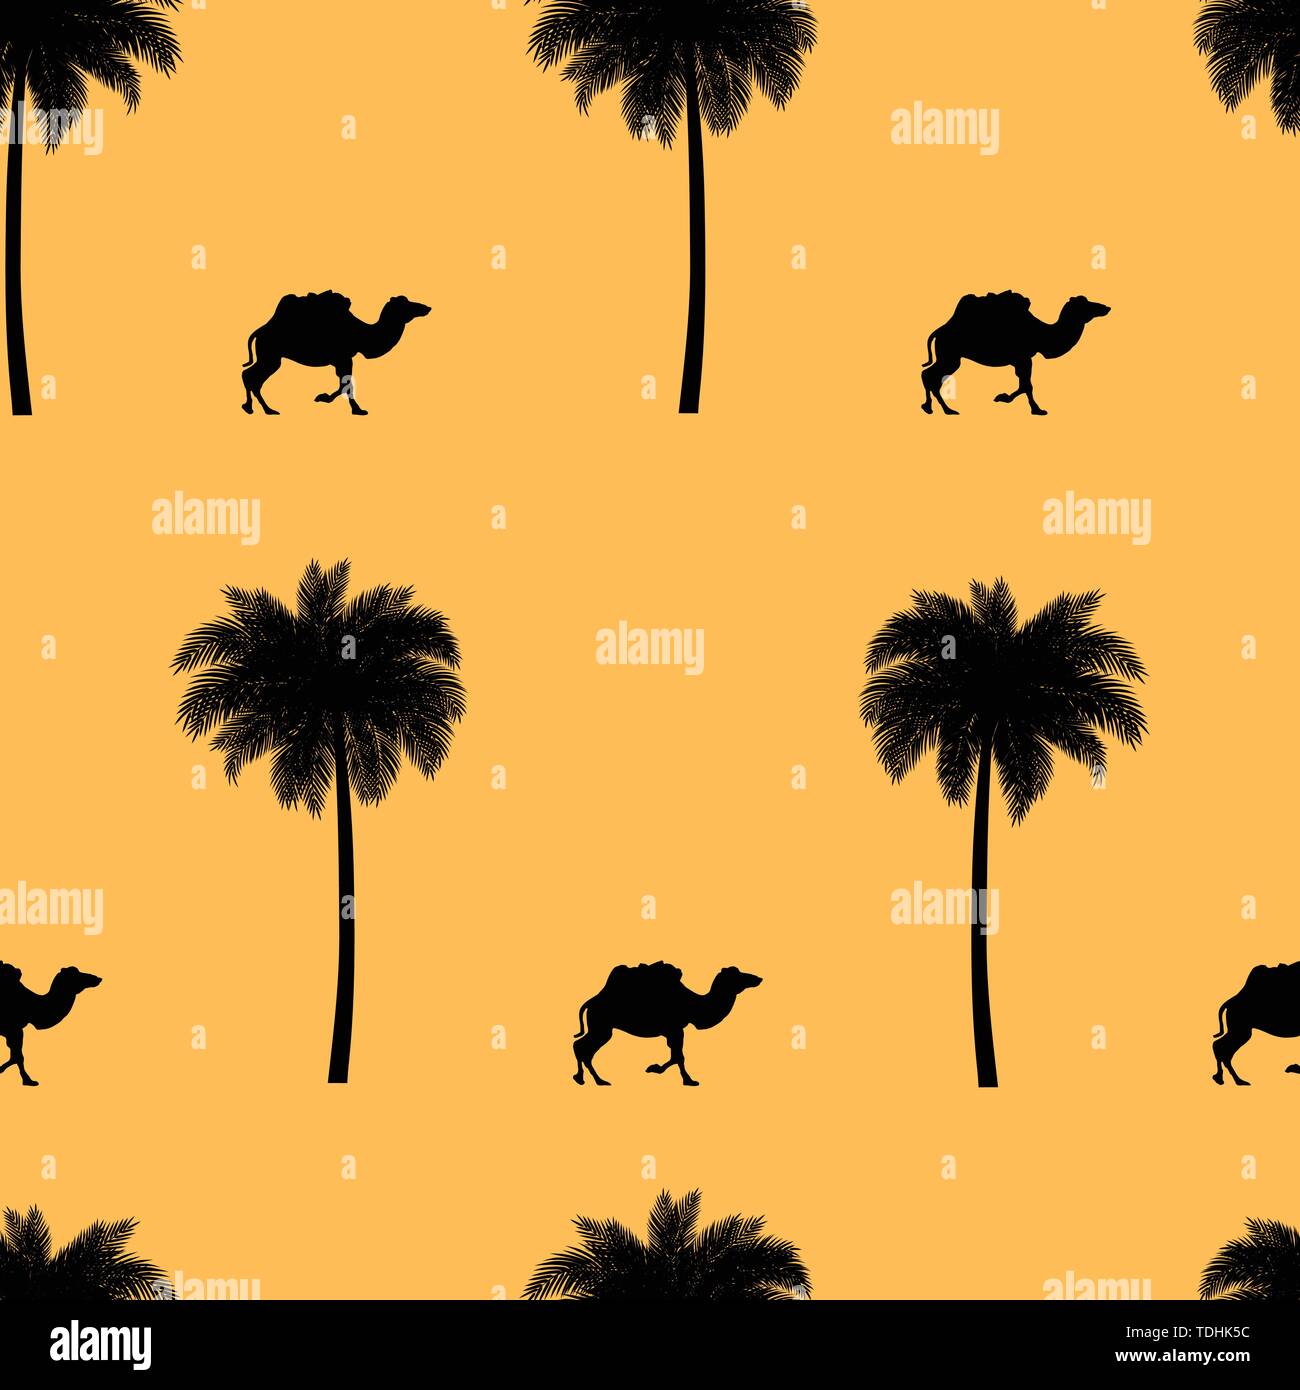 Tropical seamless pattern with camel, palm tree. Stock Vector